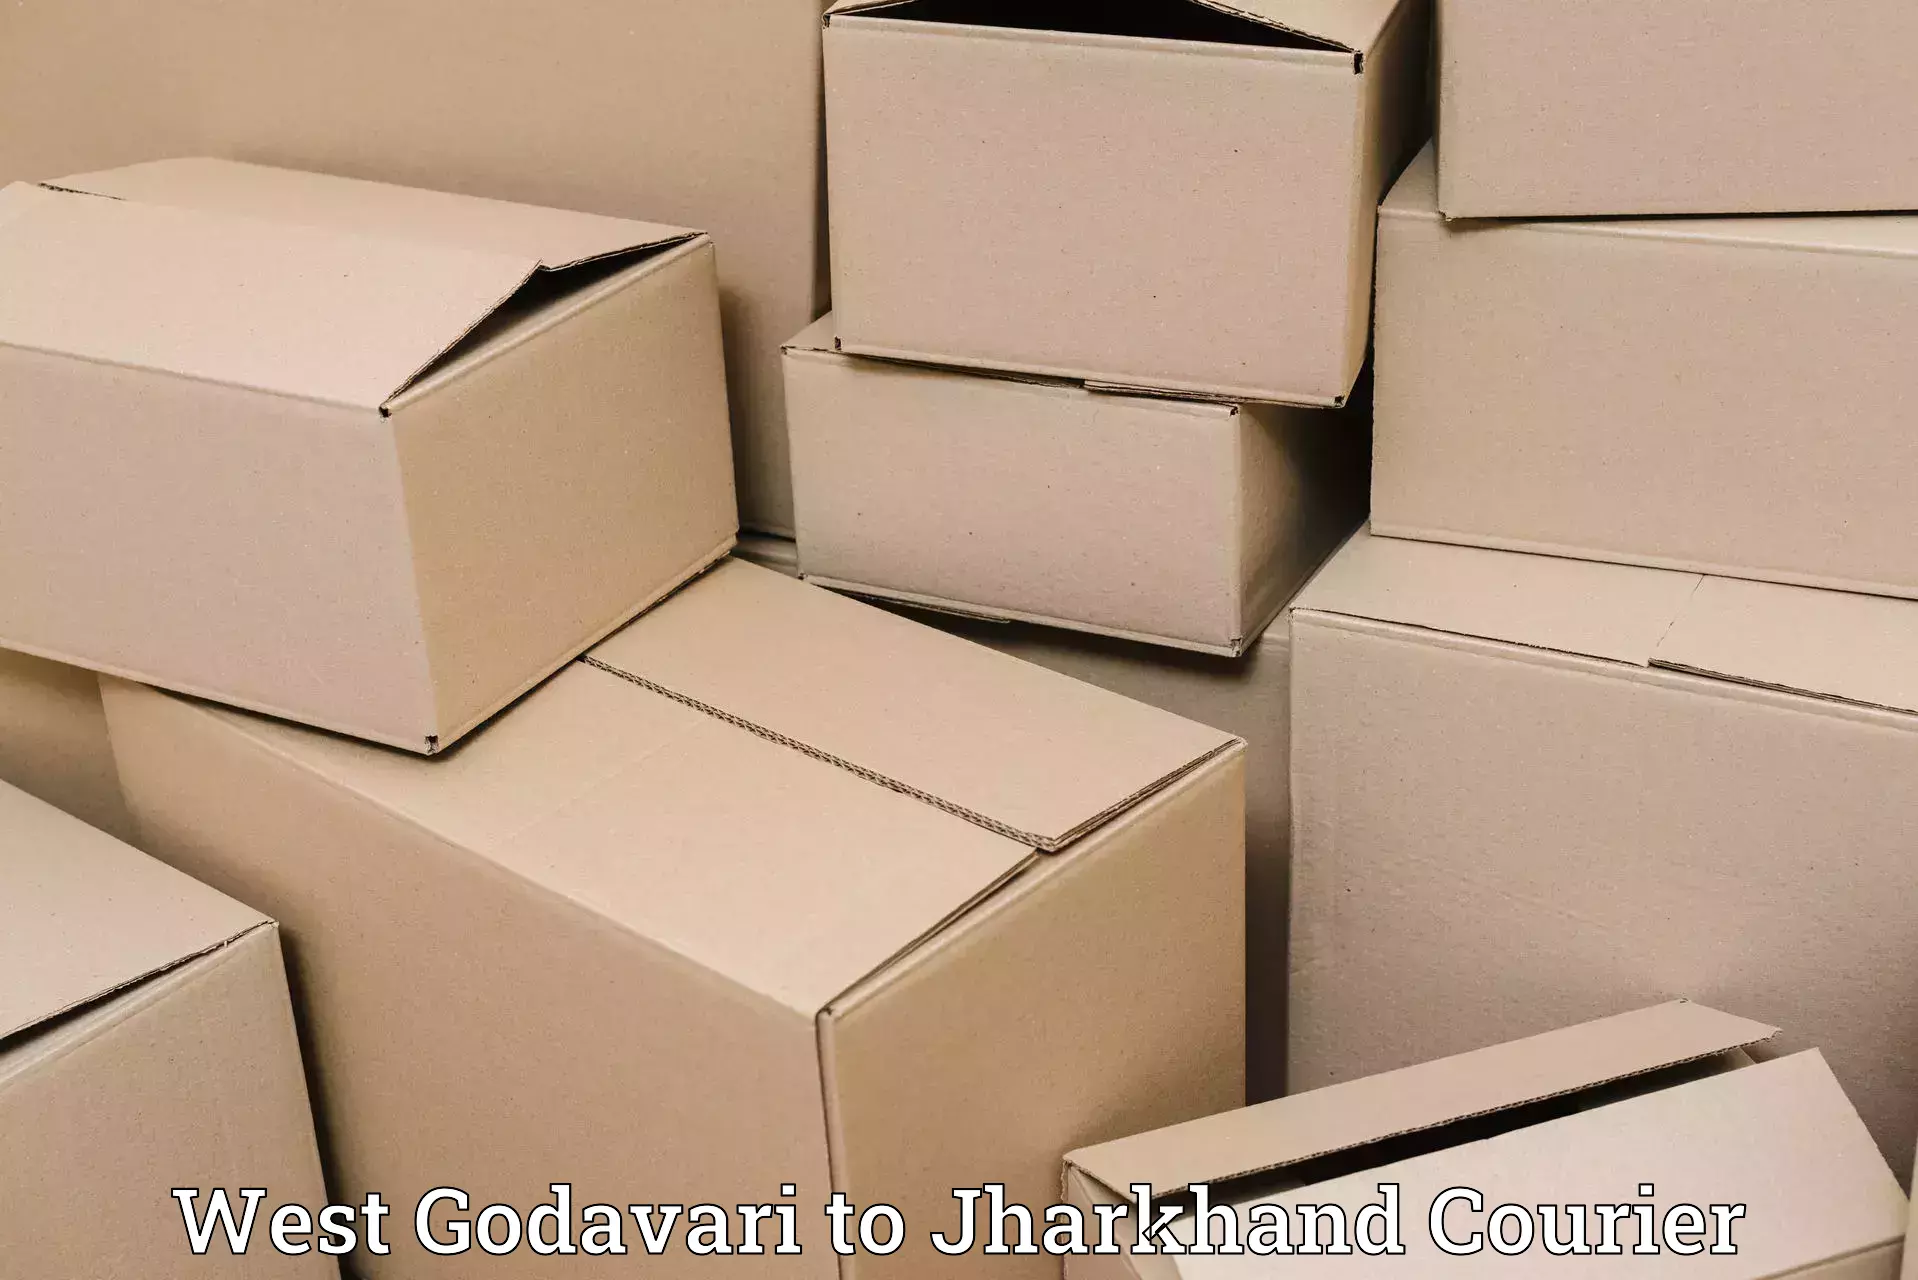 Personal effects shipping West Godavari to Jharkhand